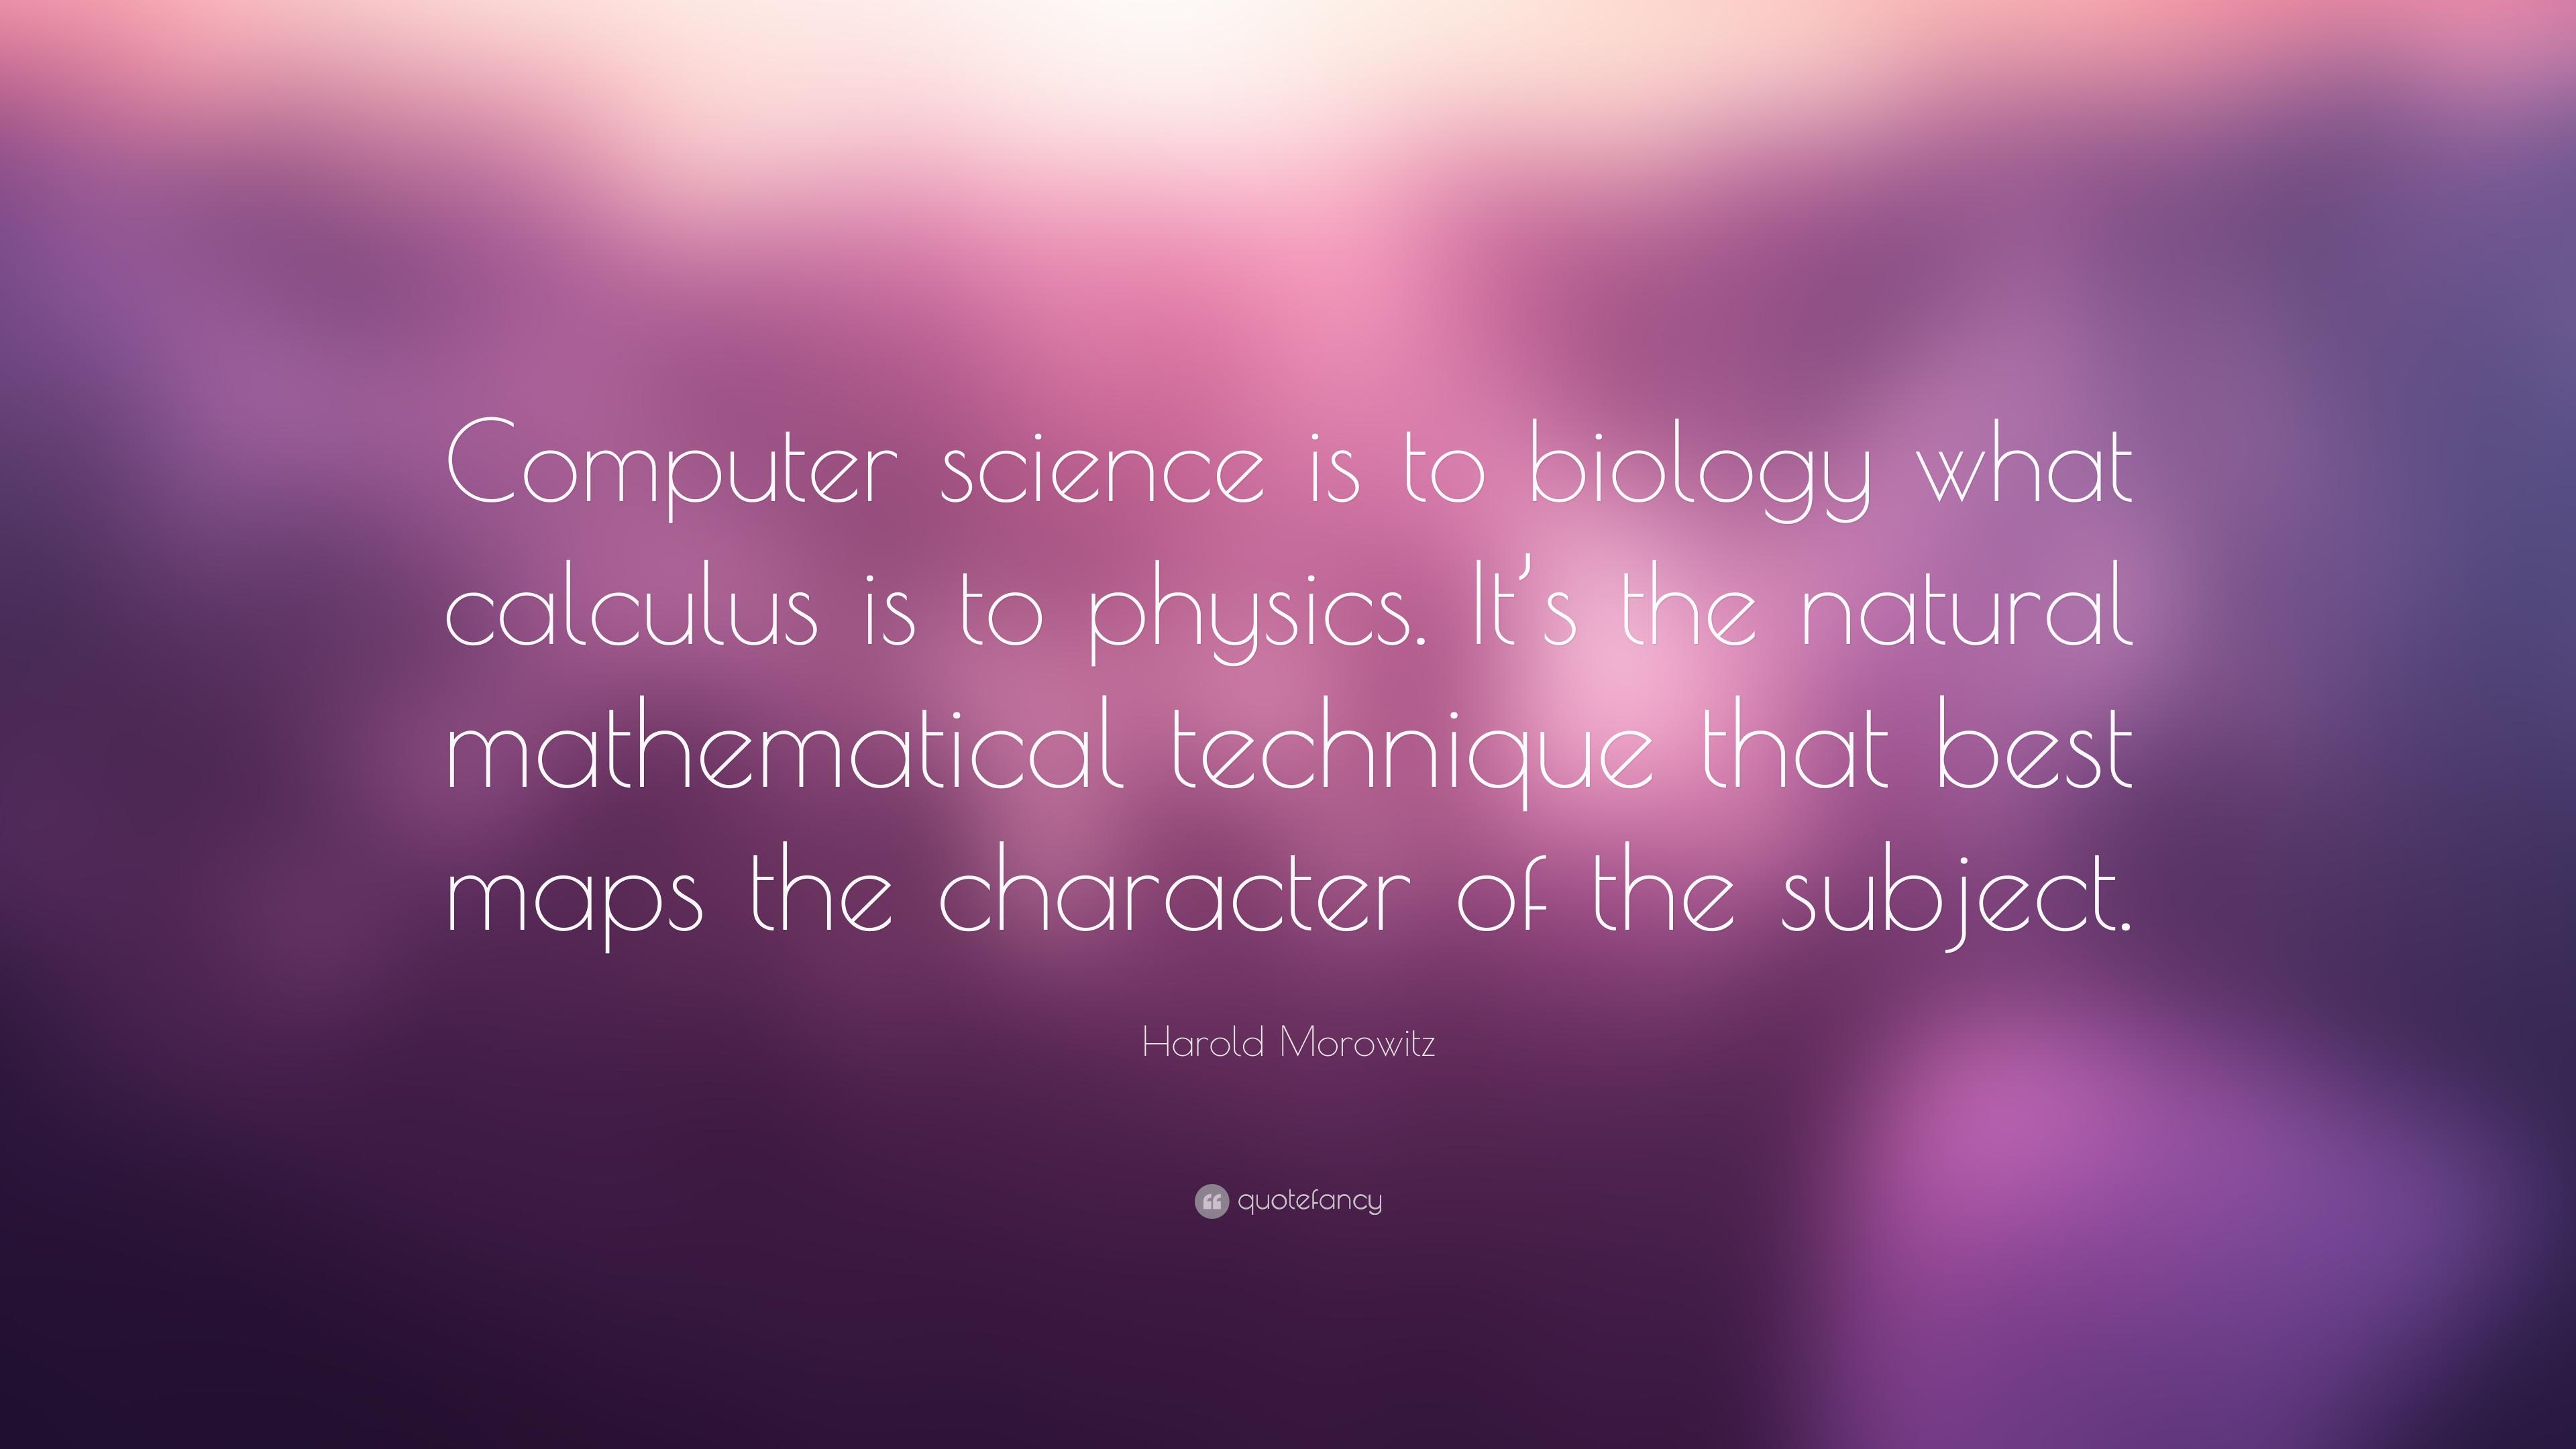 Harold Morowitz Quote: “Computer science is to biology what